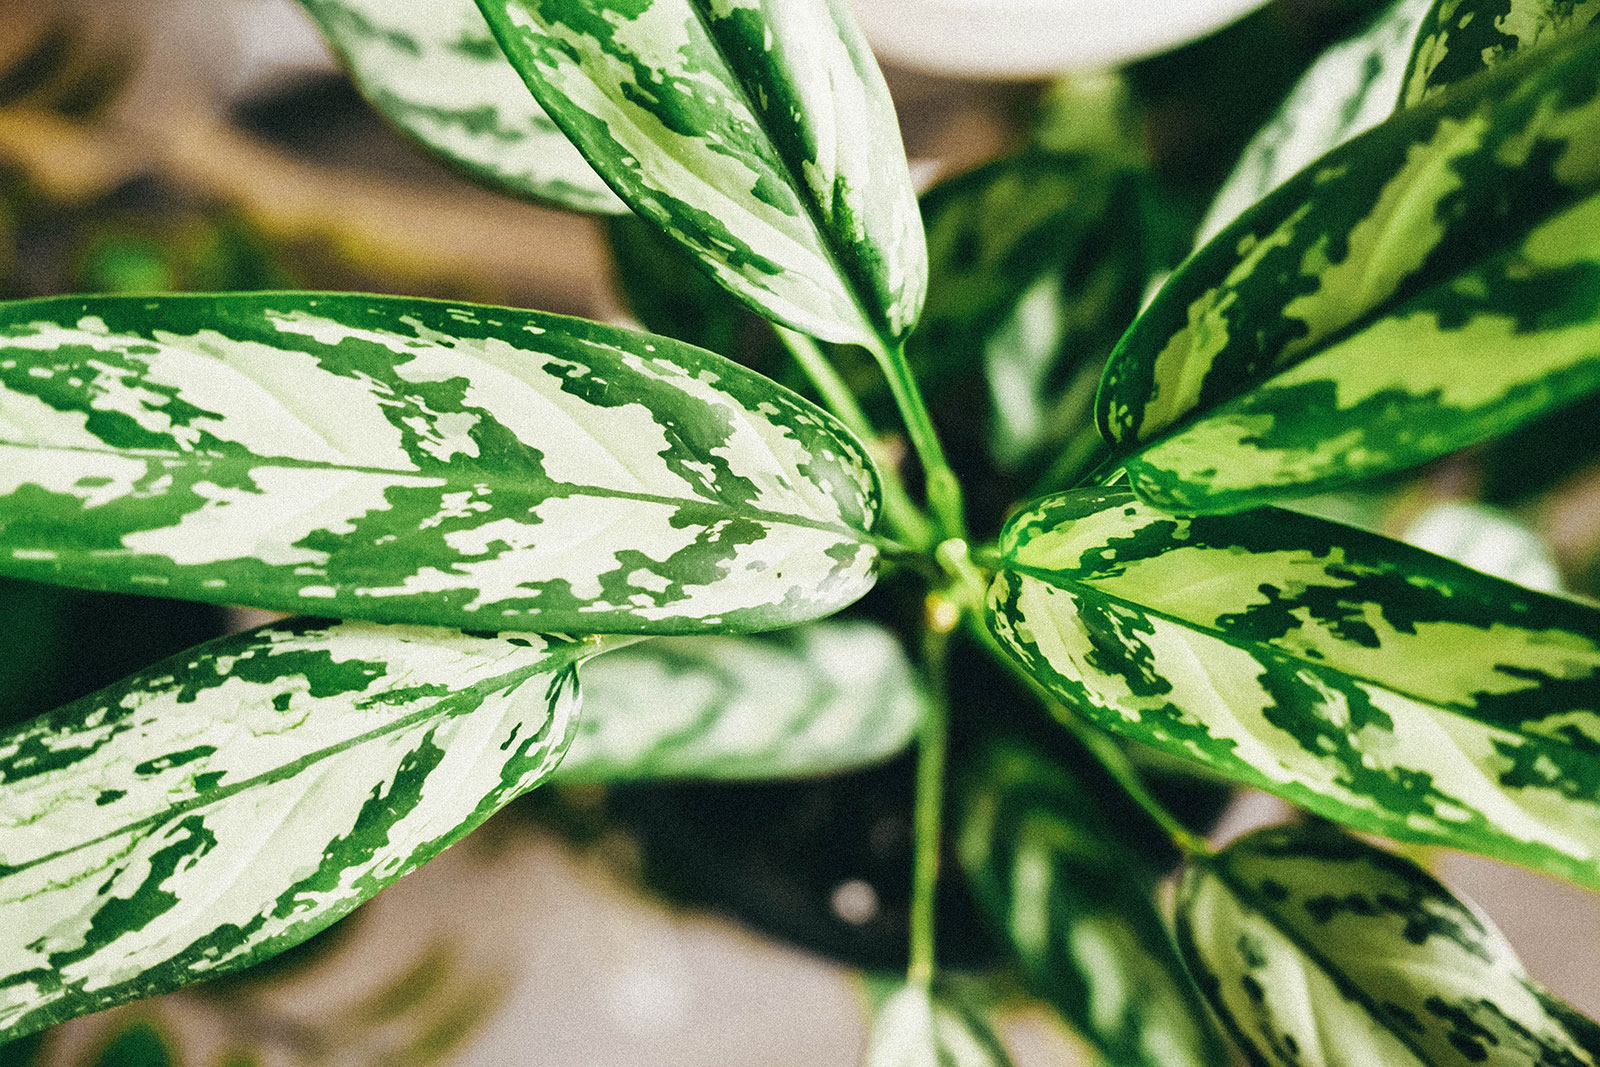 Green and white patterned Aglaonema leaves